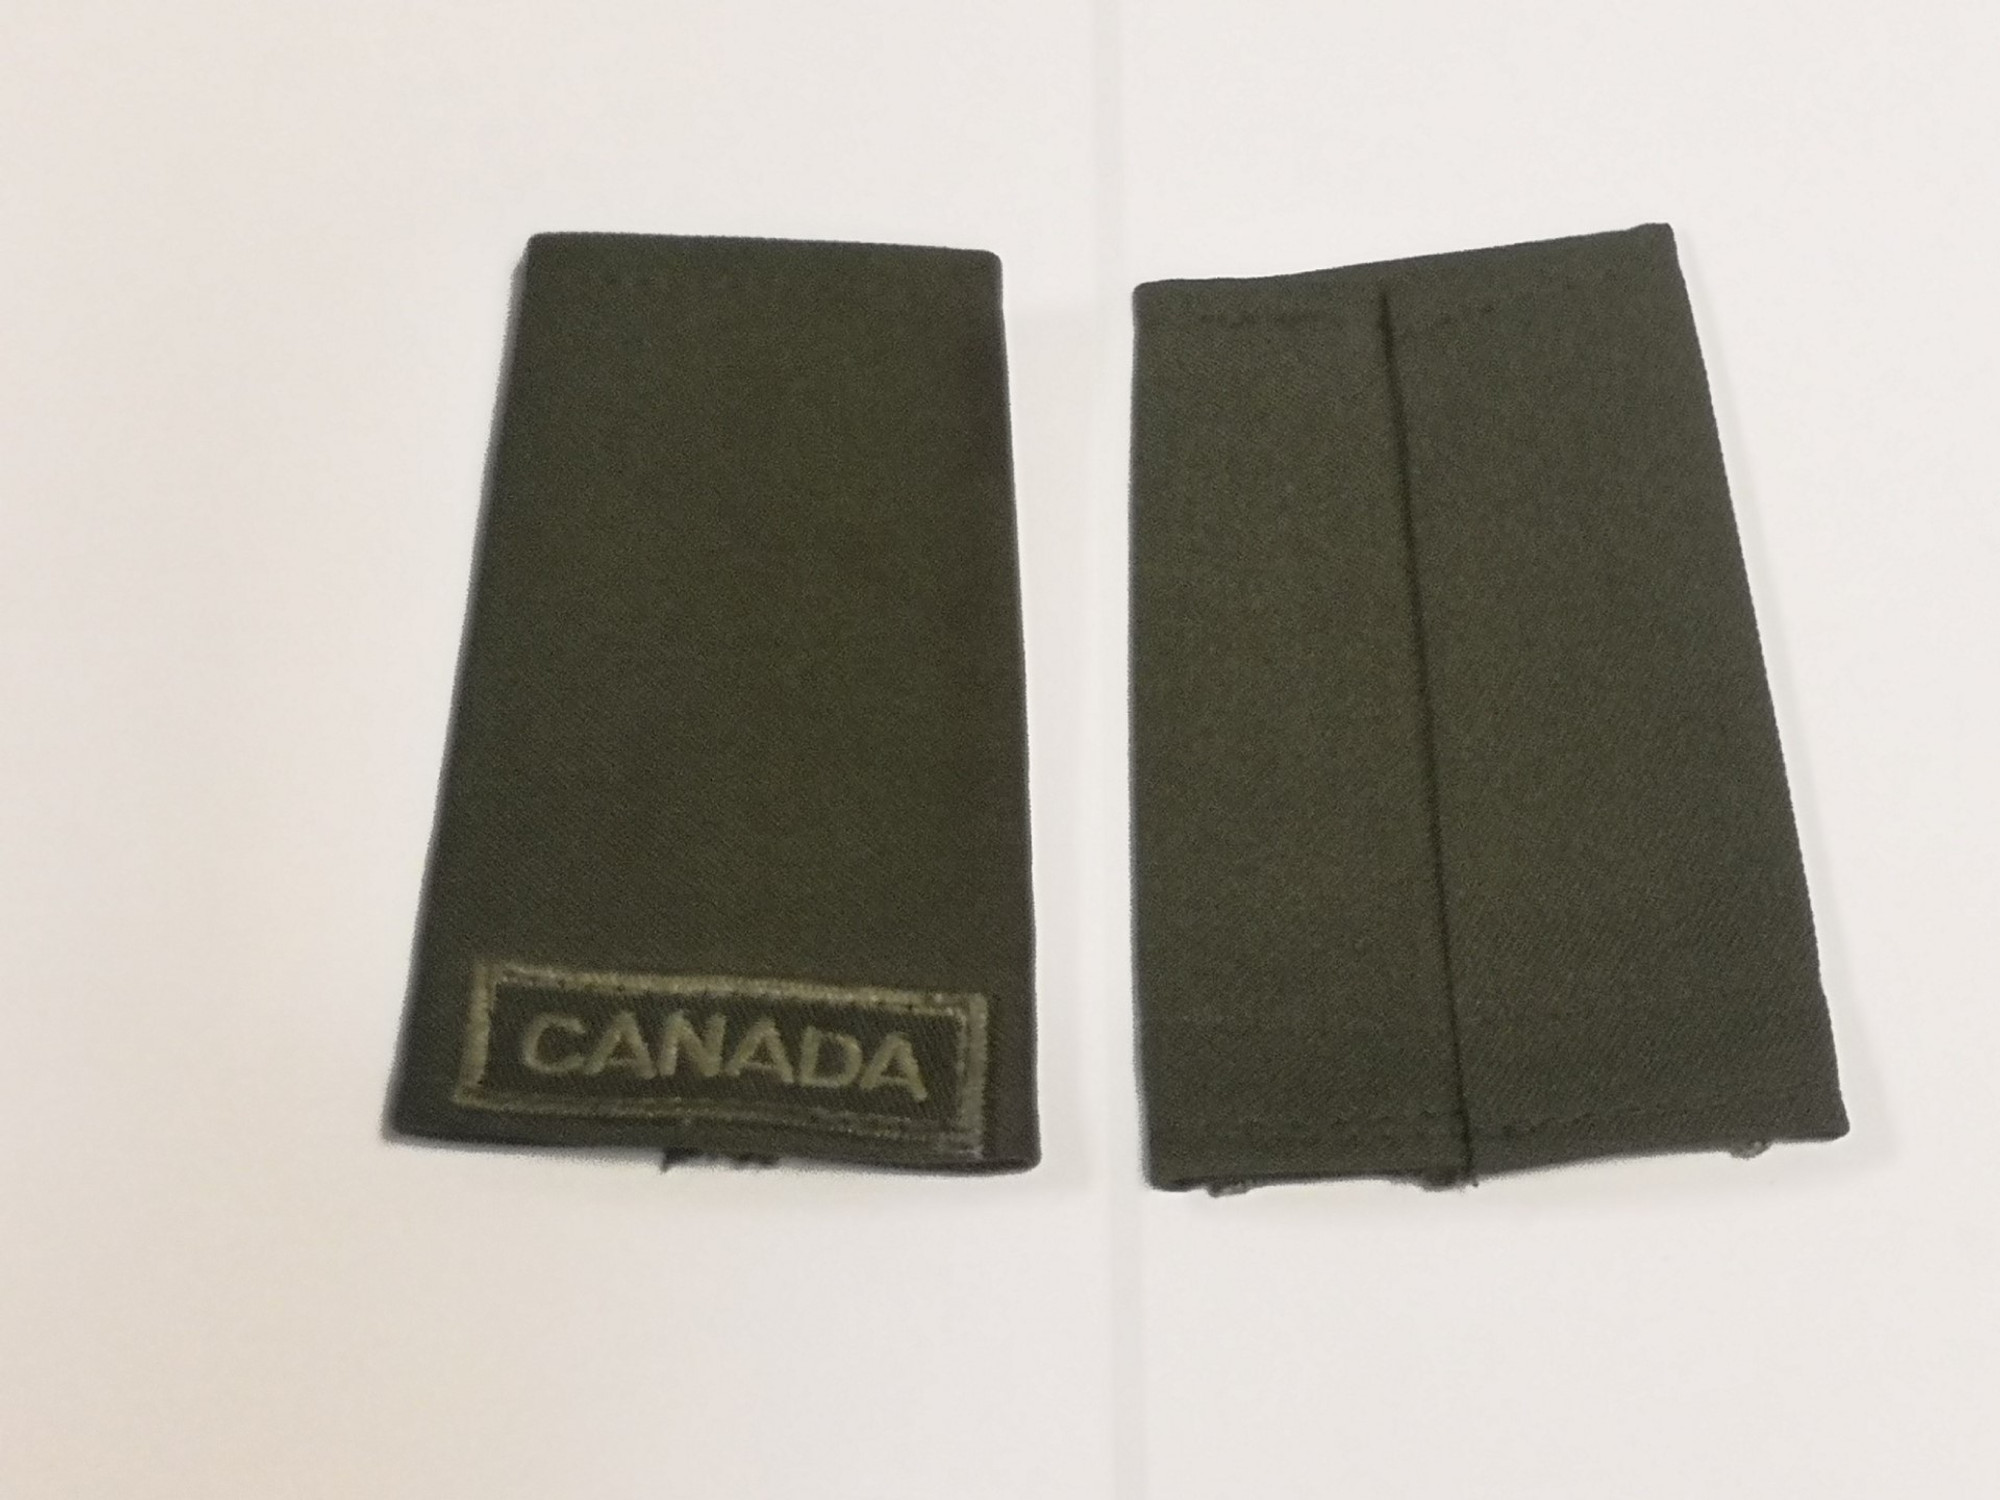 Canadian Armed Forces Rank Epaulets Army - Private (Basic)